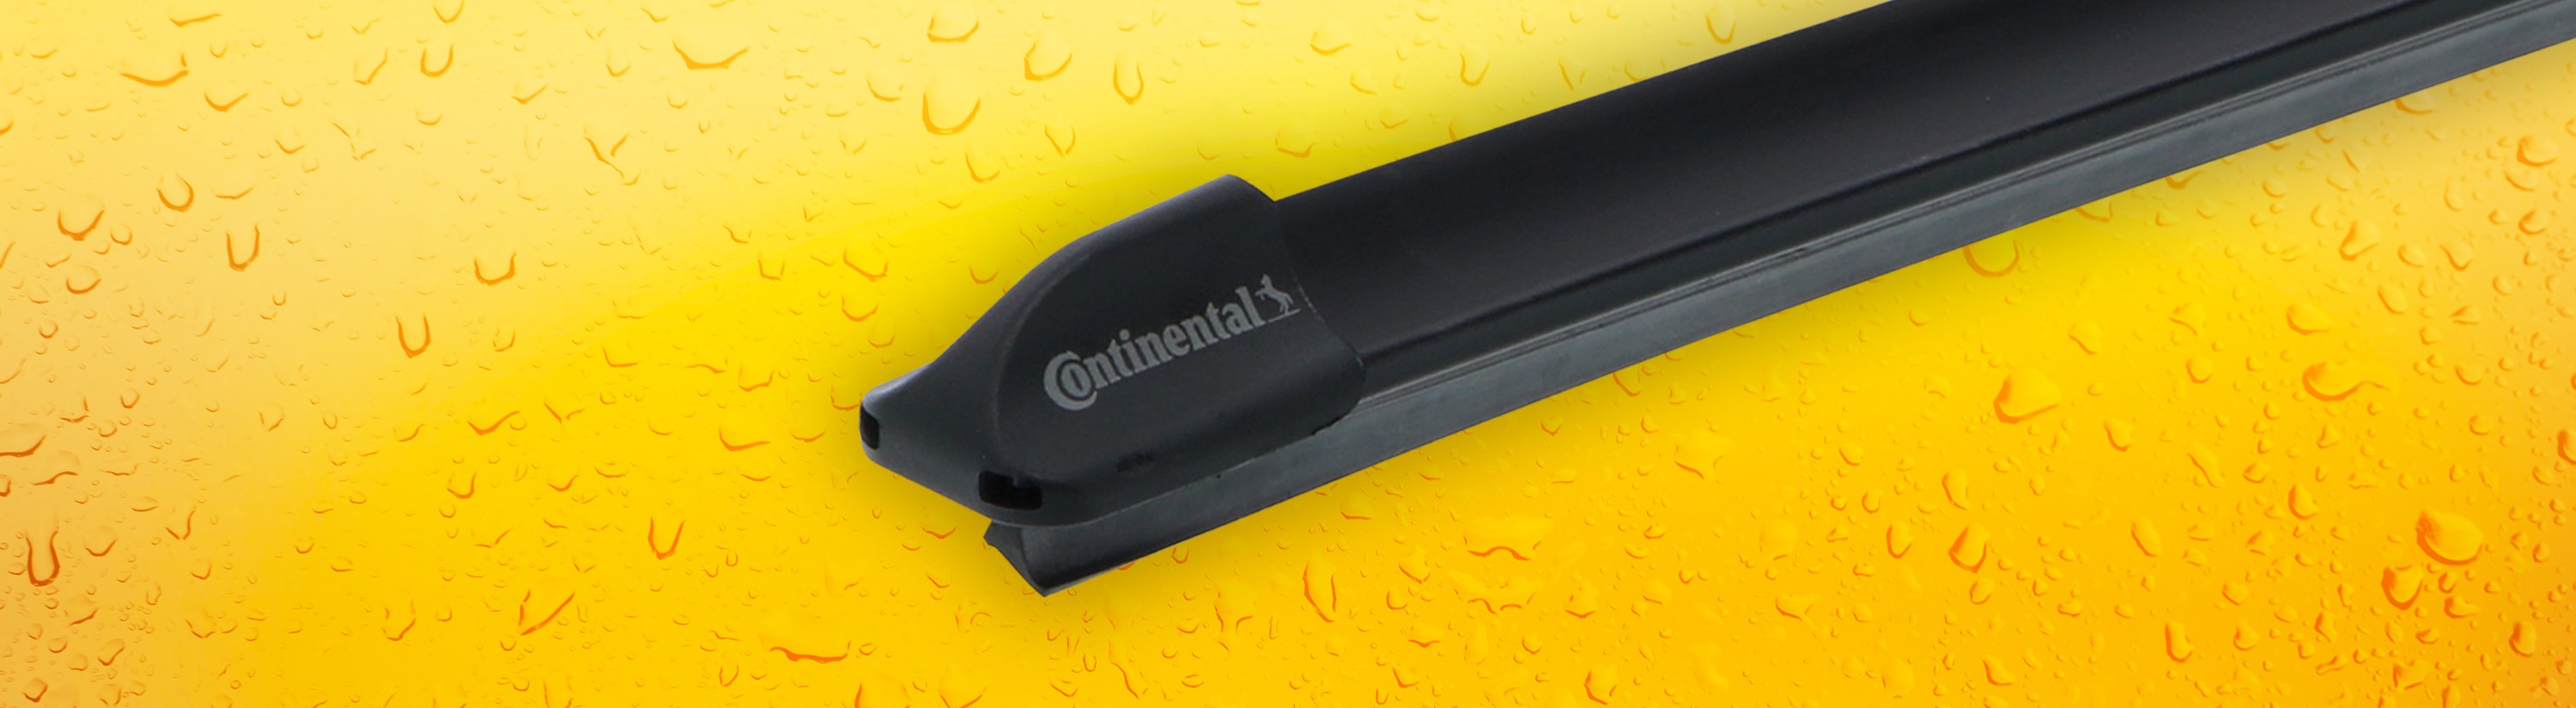 Continental-Clearcontact-Synthetic-Blade-Wipers-Header